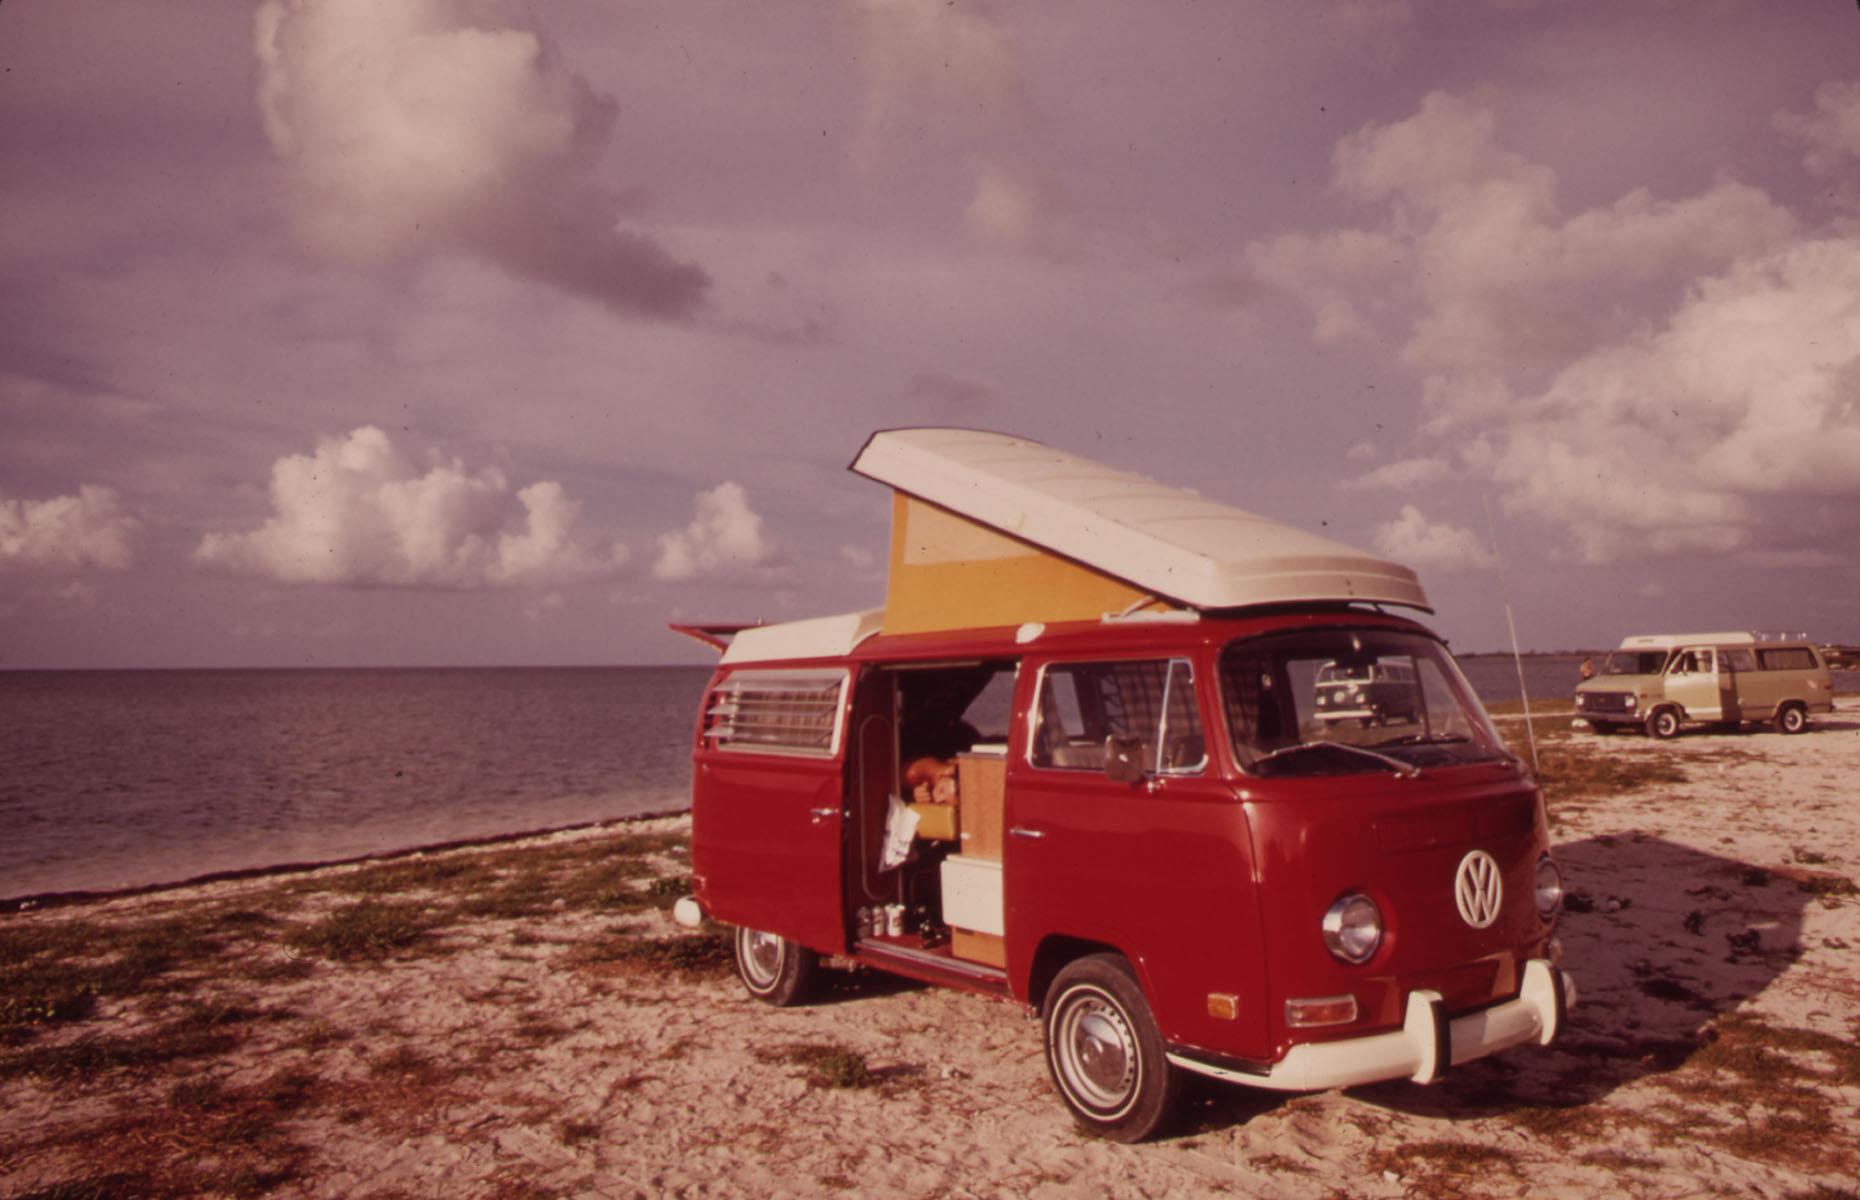 The 1960s and the 1970s ushered in the era of the hippie and the VW camper van became more than a motorhome: it became a symbol of peace, freedom and alternative lifestyles. This Volkswagen camper is sitting pretty on a beach in Little Duck Key in the Florida Keys.